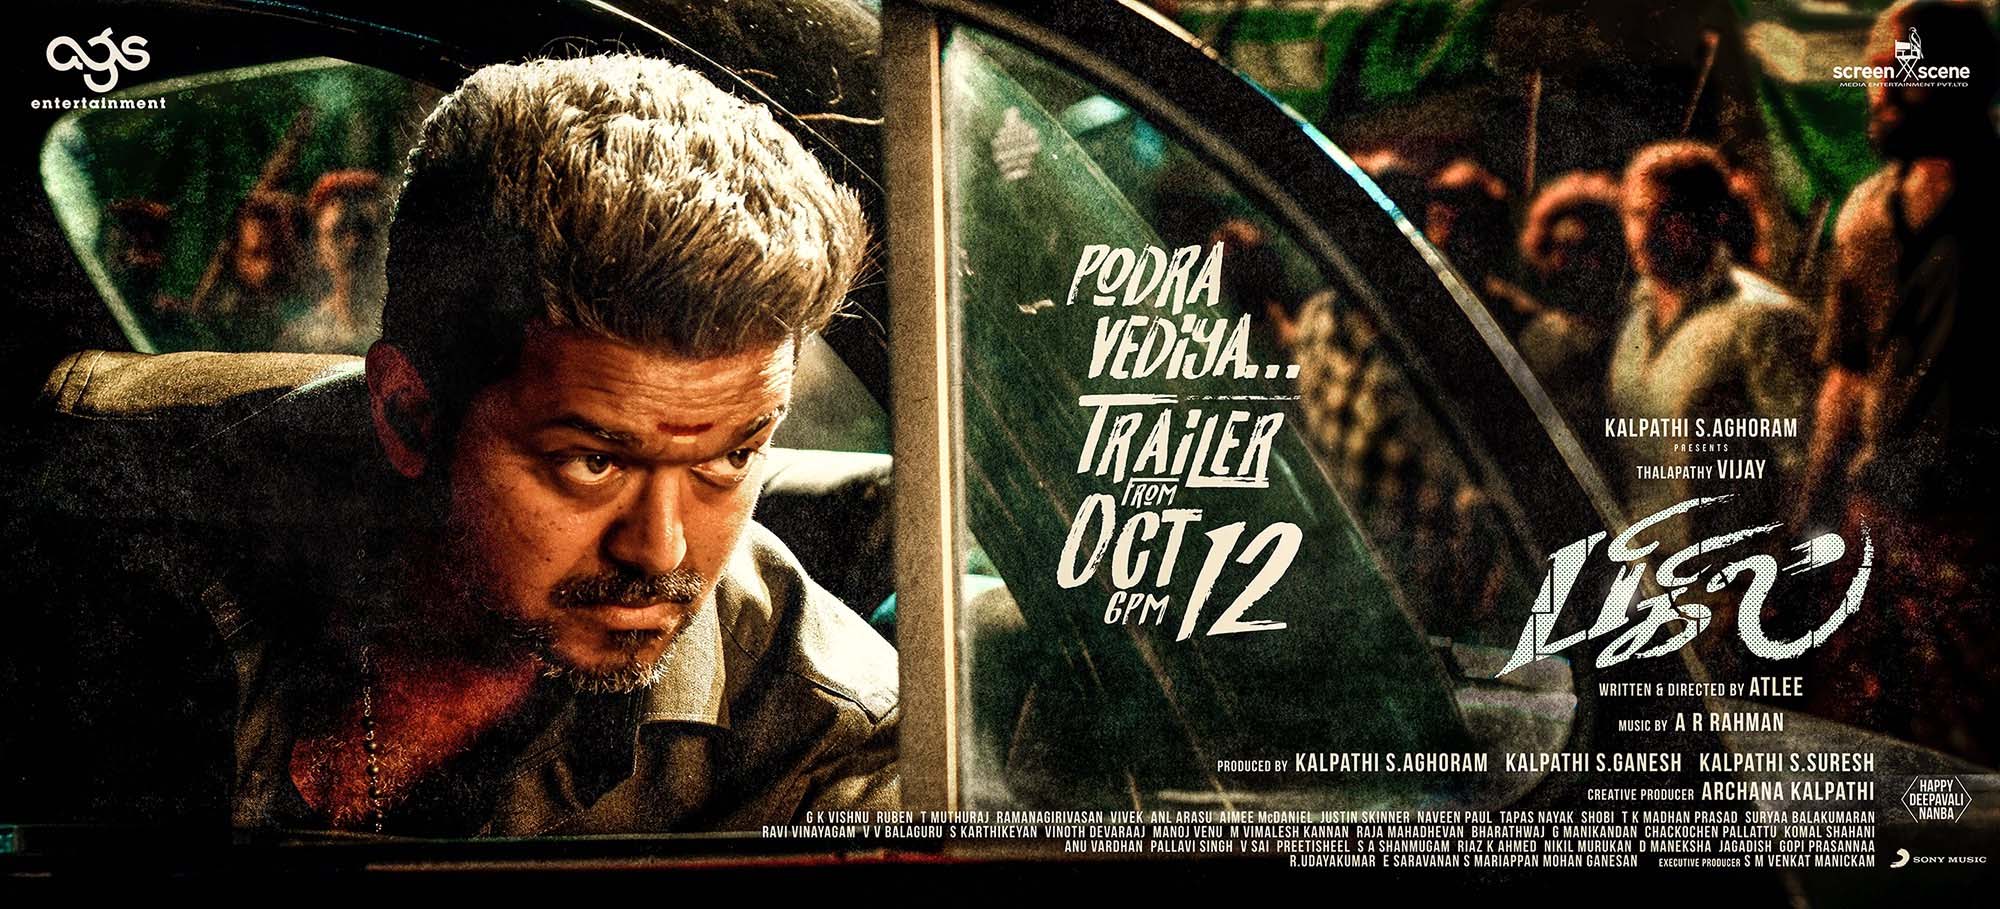 Bigil Movie Trailer from Oct 12th Poster